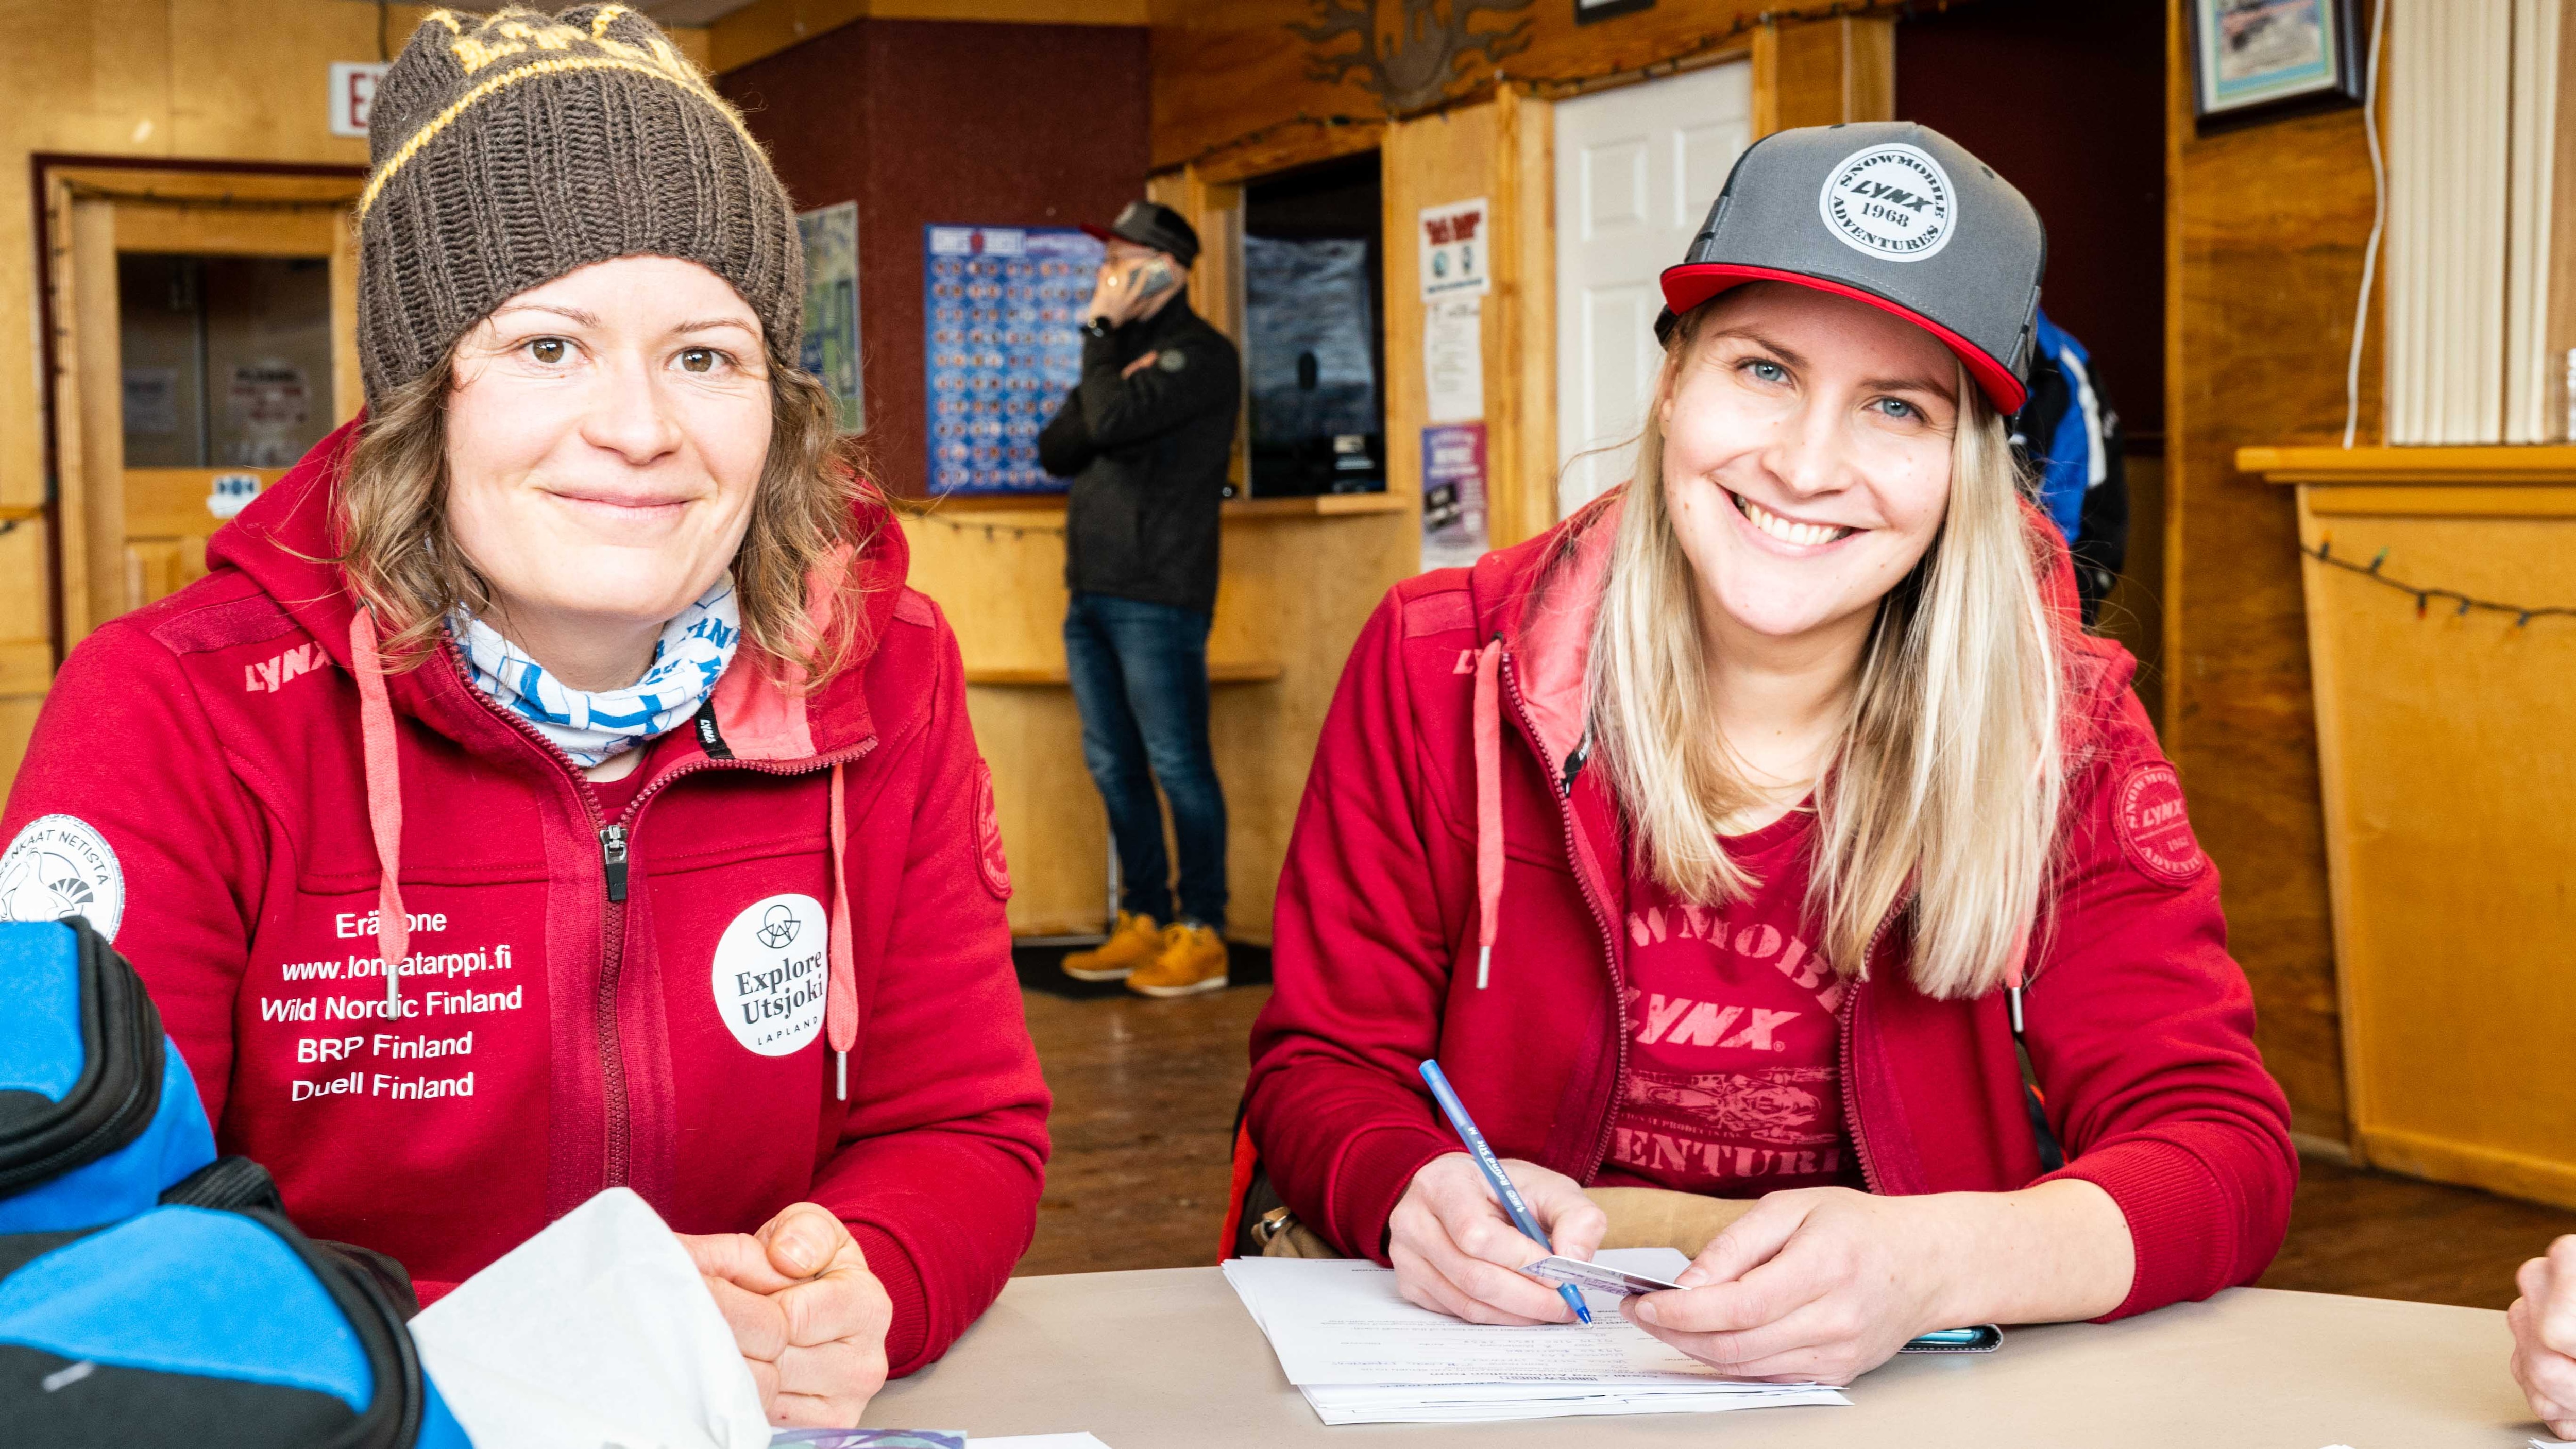 Two Finnish ladies smiling and signing documents